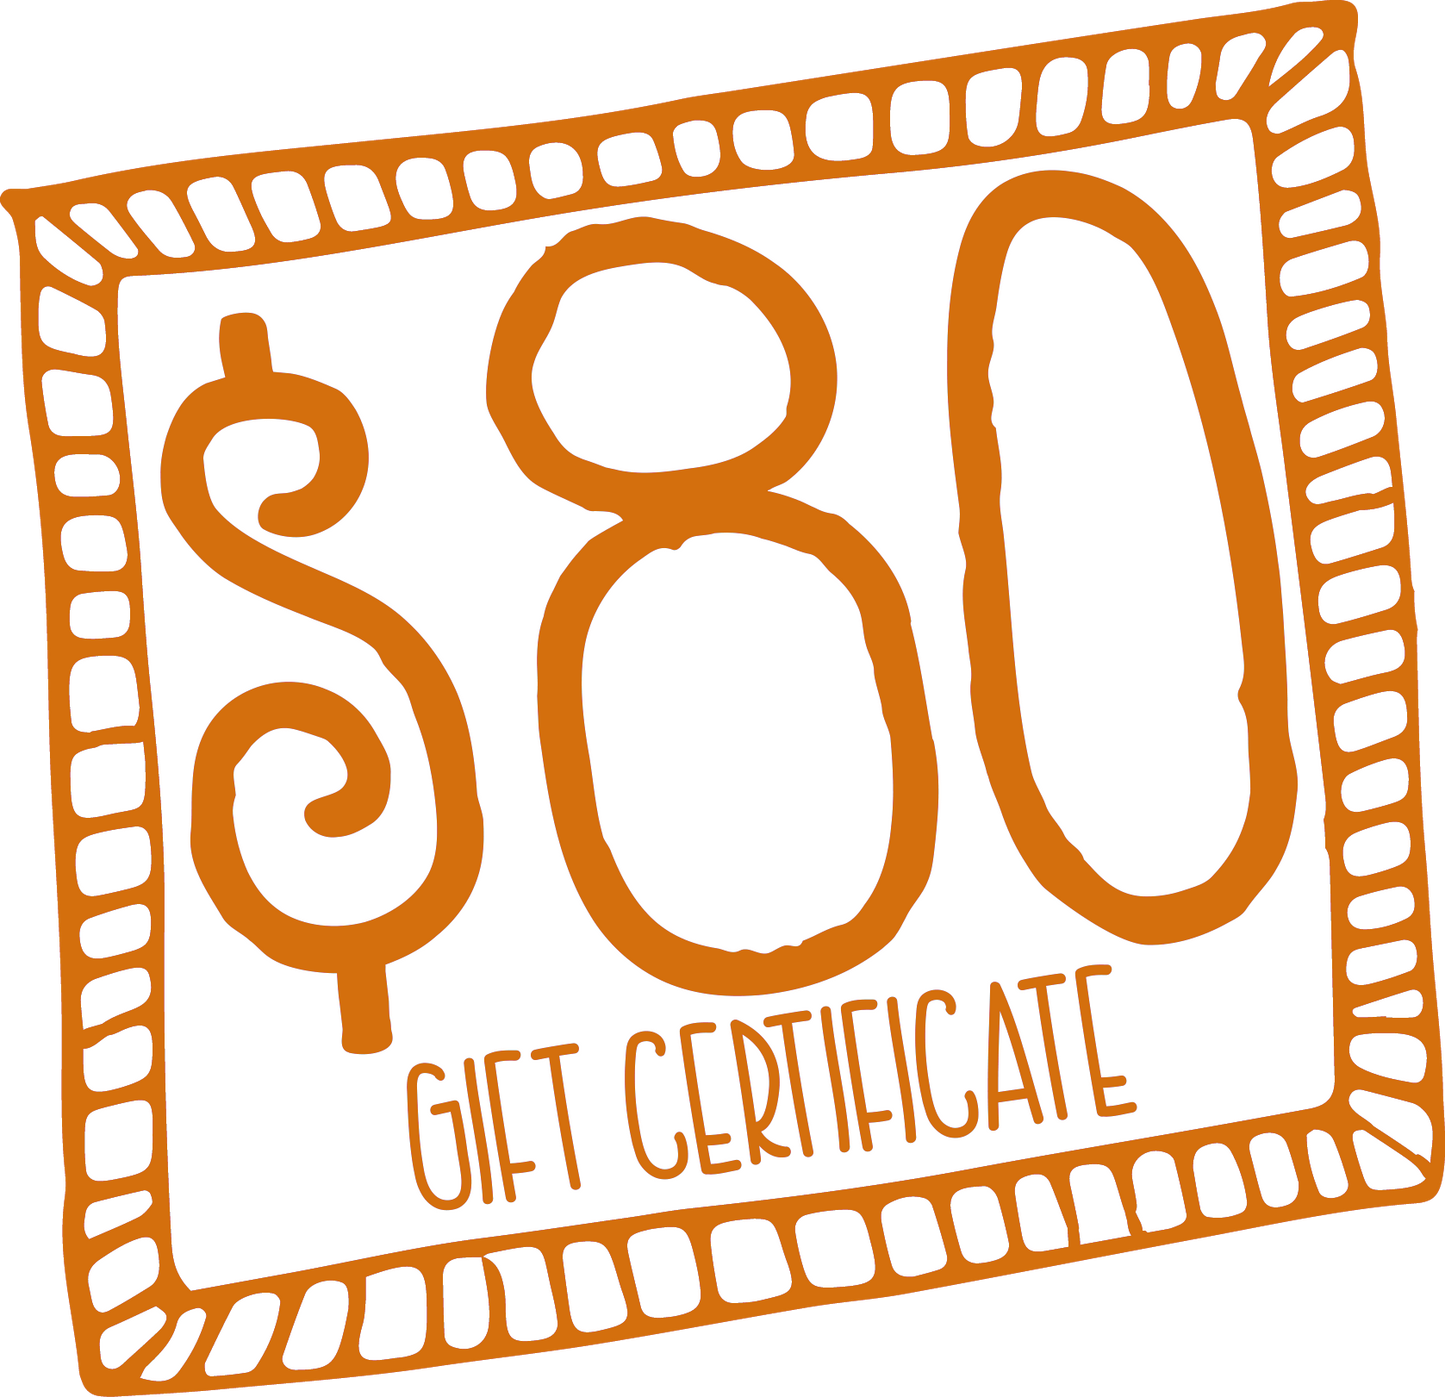 Gift Certificate for $80